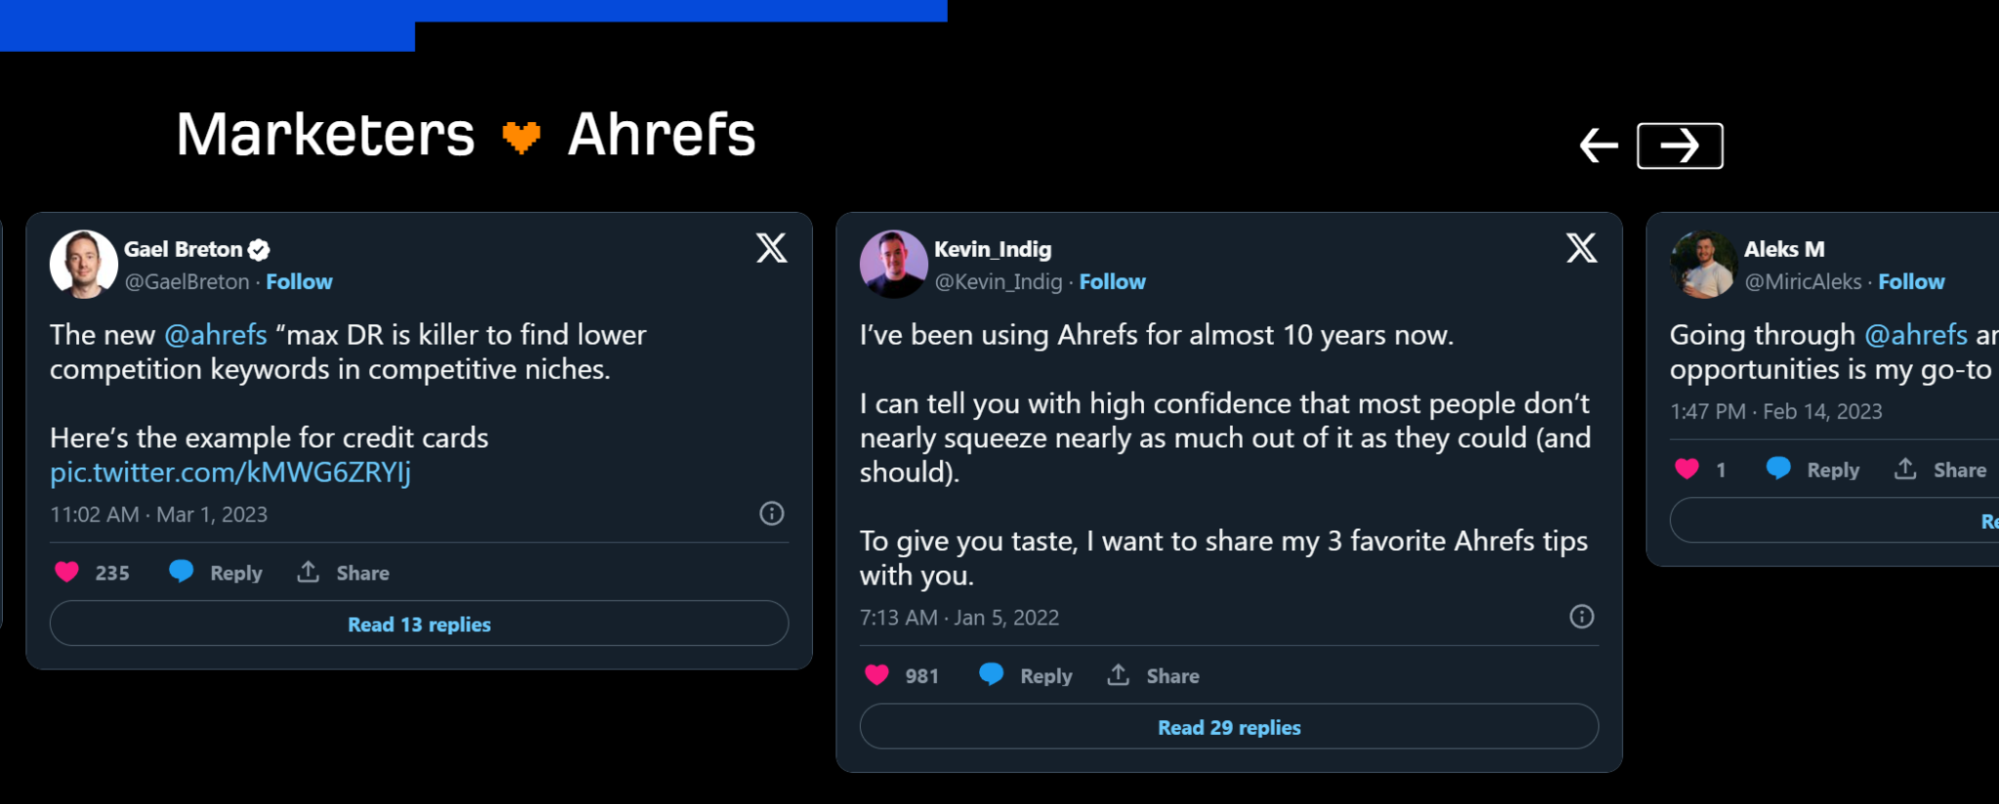 Ahrefs ends it comparison page with Tweets from marketers showing their support for the product